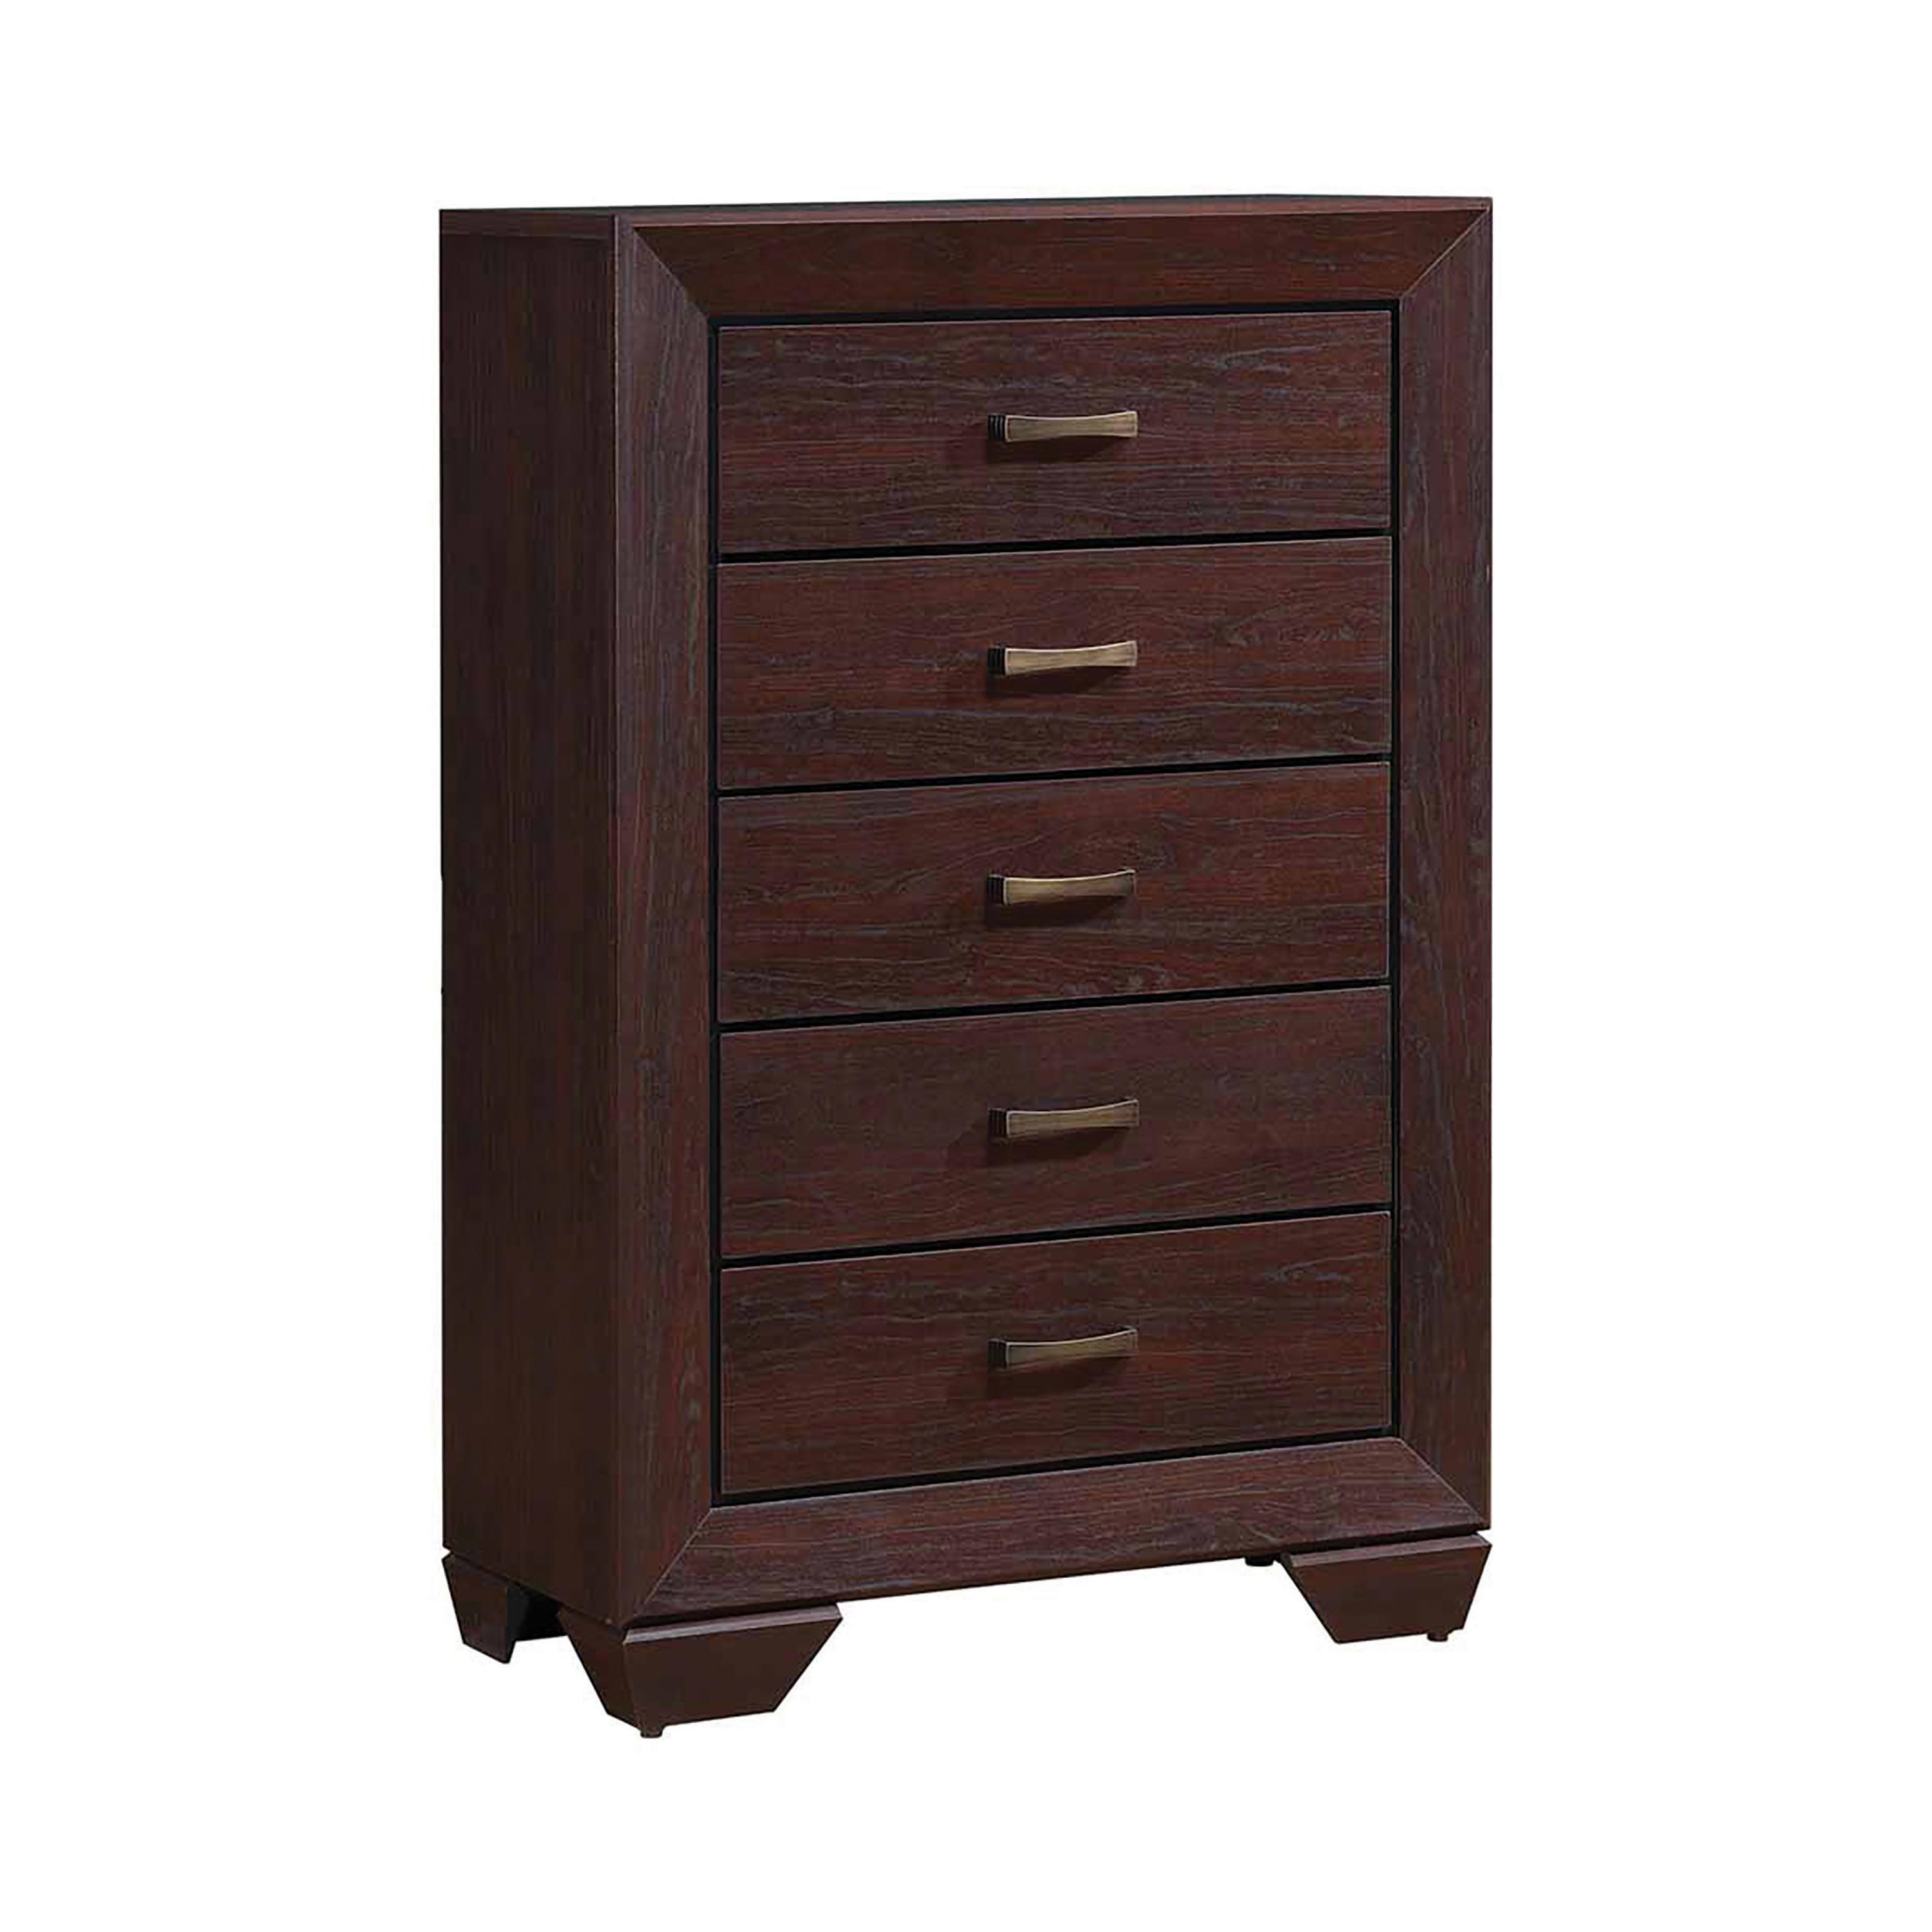 Transitional Chest 204395 Kauffman 204395 in Cocoa 